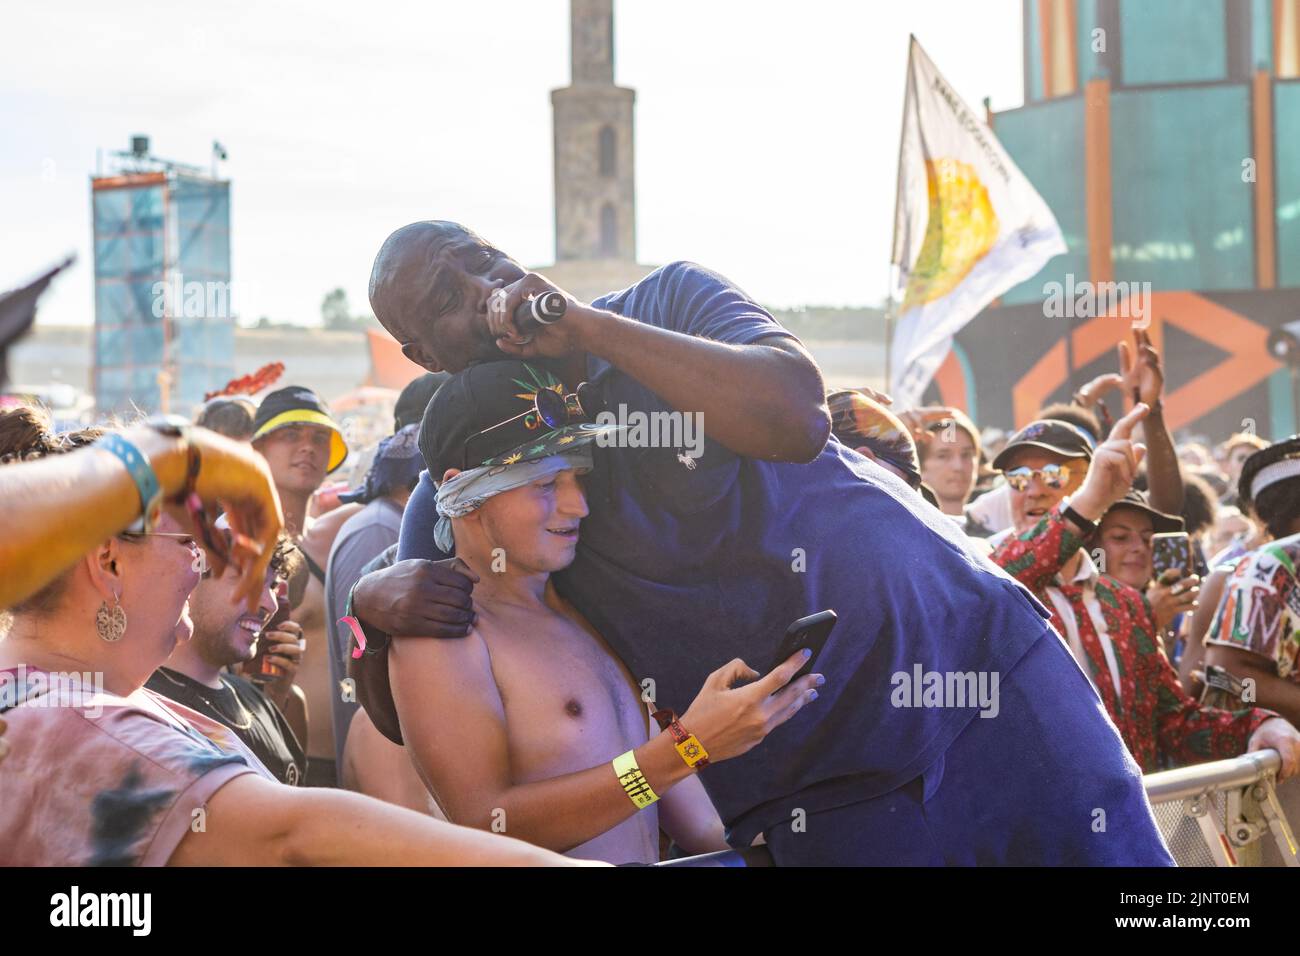 Boomtown, Winchester, UK Saturday 13 August 2022 De La Soul play Grand Central at Boomtown 2022 Credit: Denise Laura Baker/Alamy Live News Credit: Denise Laura Baker/Alamy Live News Stock Photo